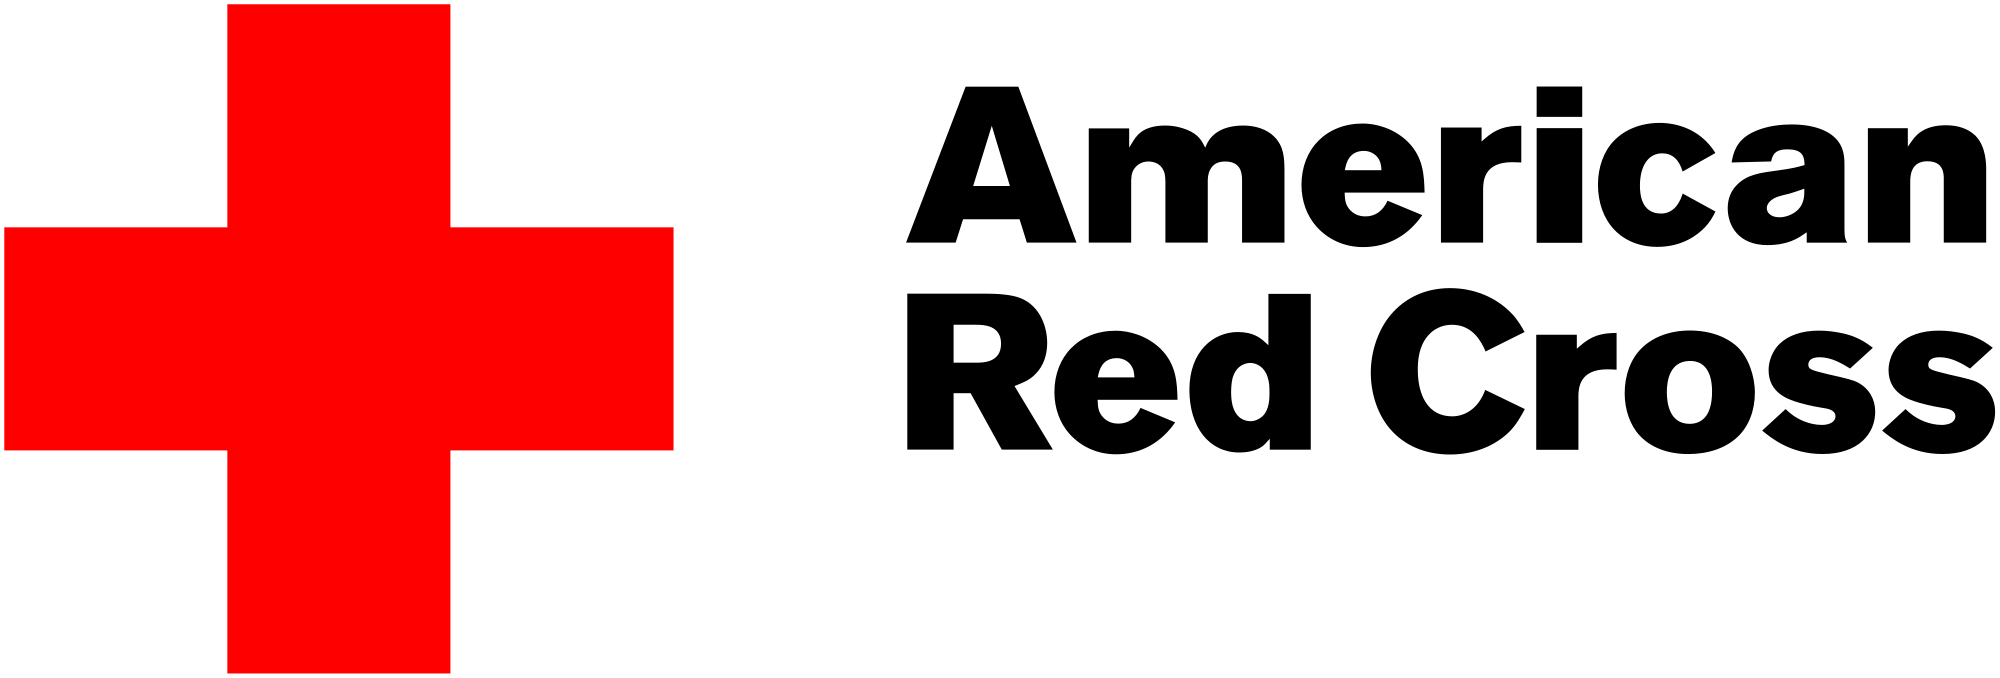 Official American Red Cross Logo - American Red Cross Safety Courses | UTSA Campus Recreation